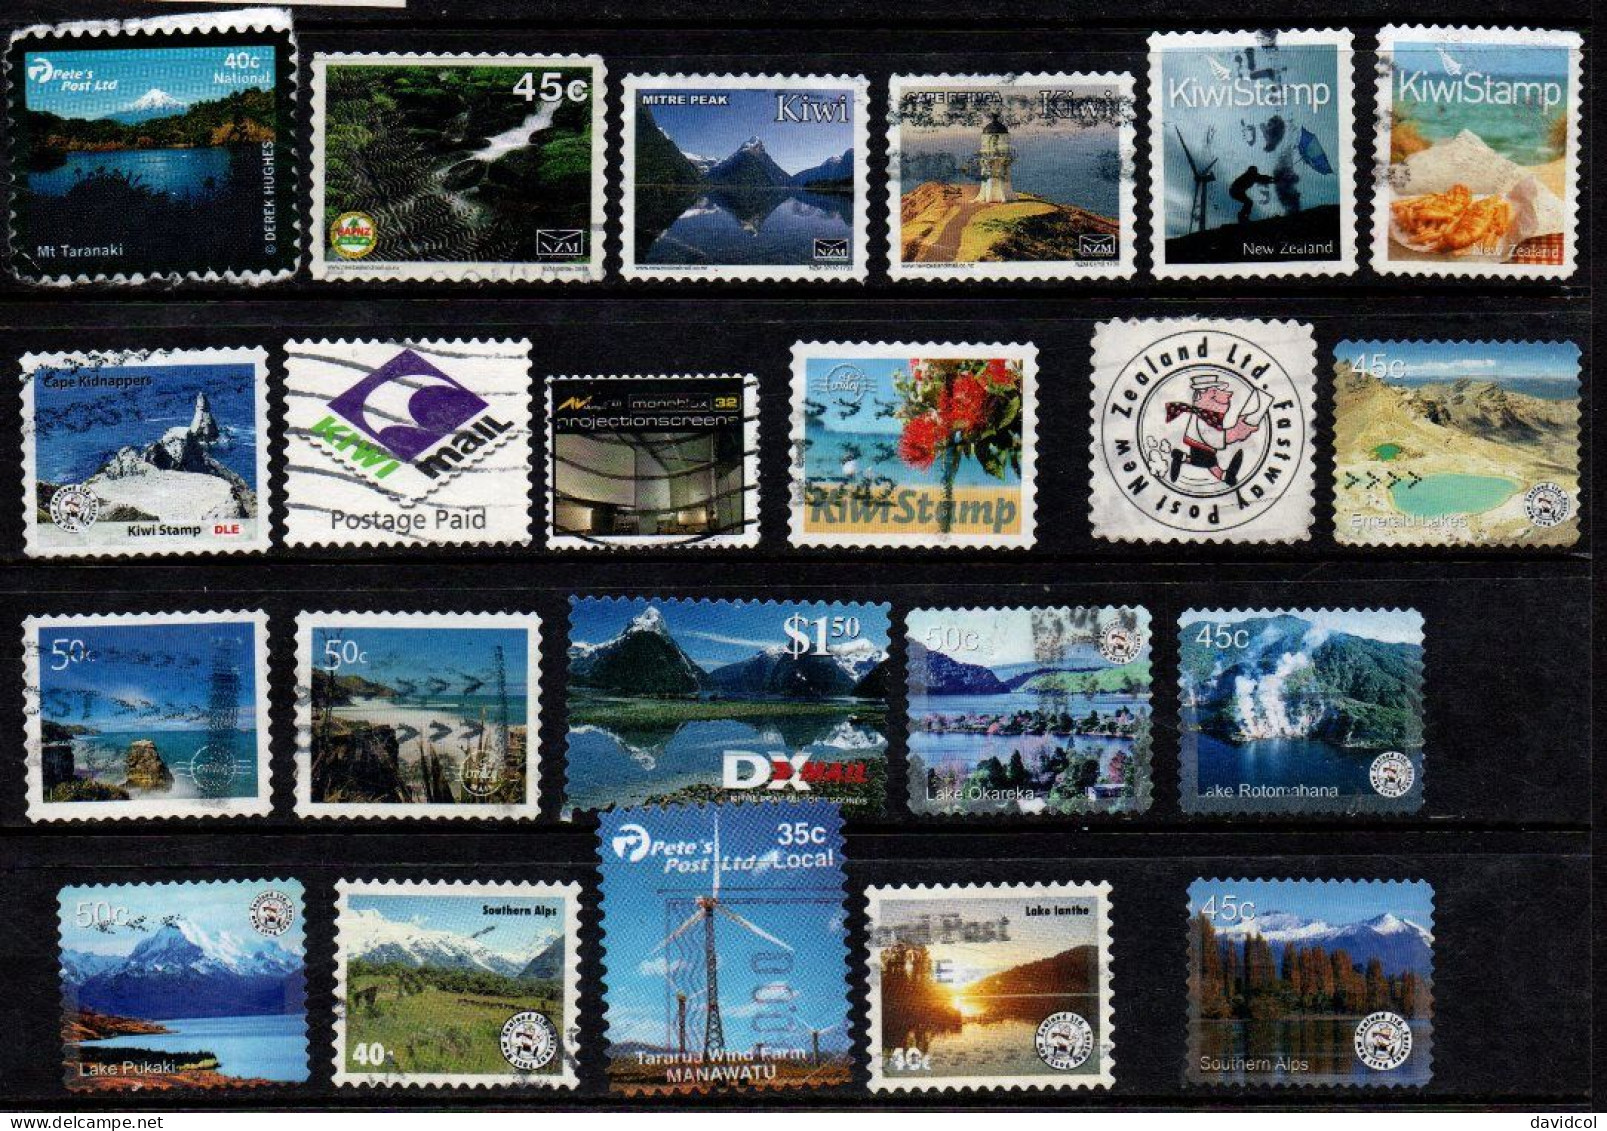 2690D - NEW ZEALAND - 2000'S - USED LOT KIWI, FASTWAY, DXMAIL, PETE'S POST.... - Used Stamps